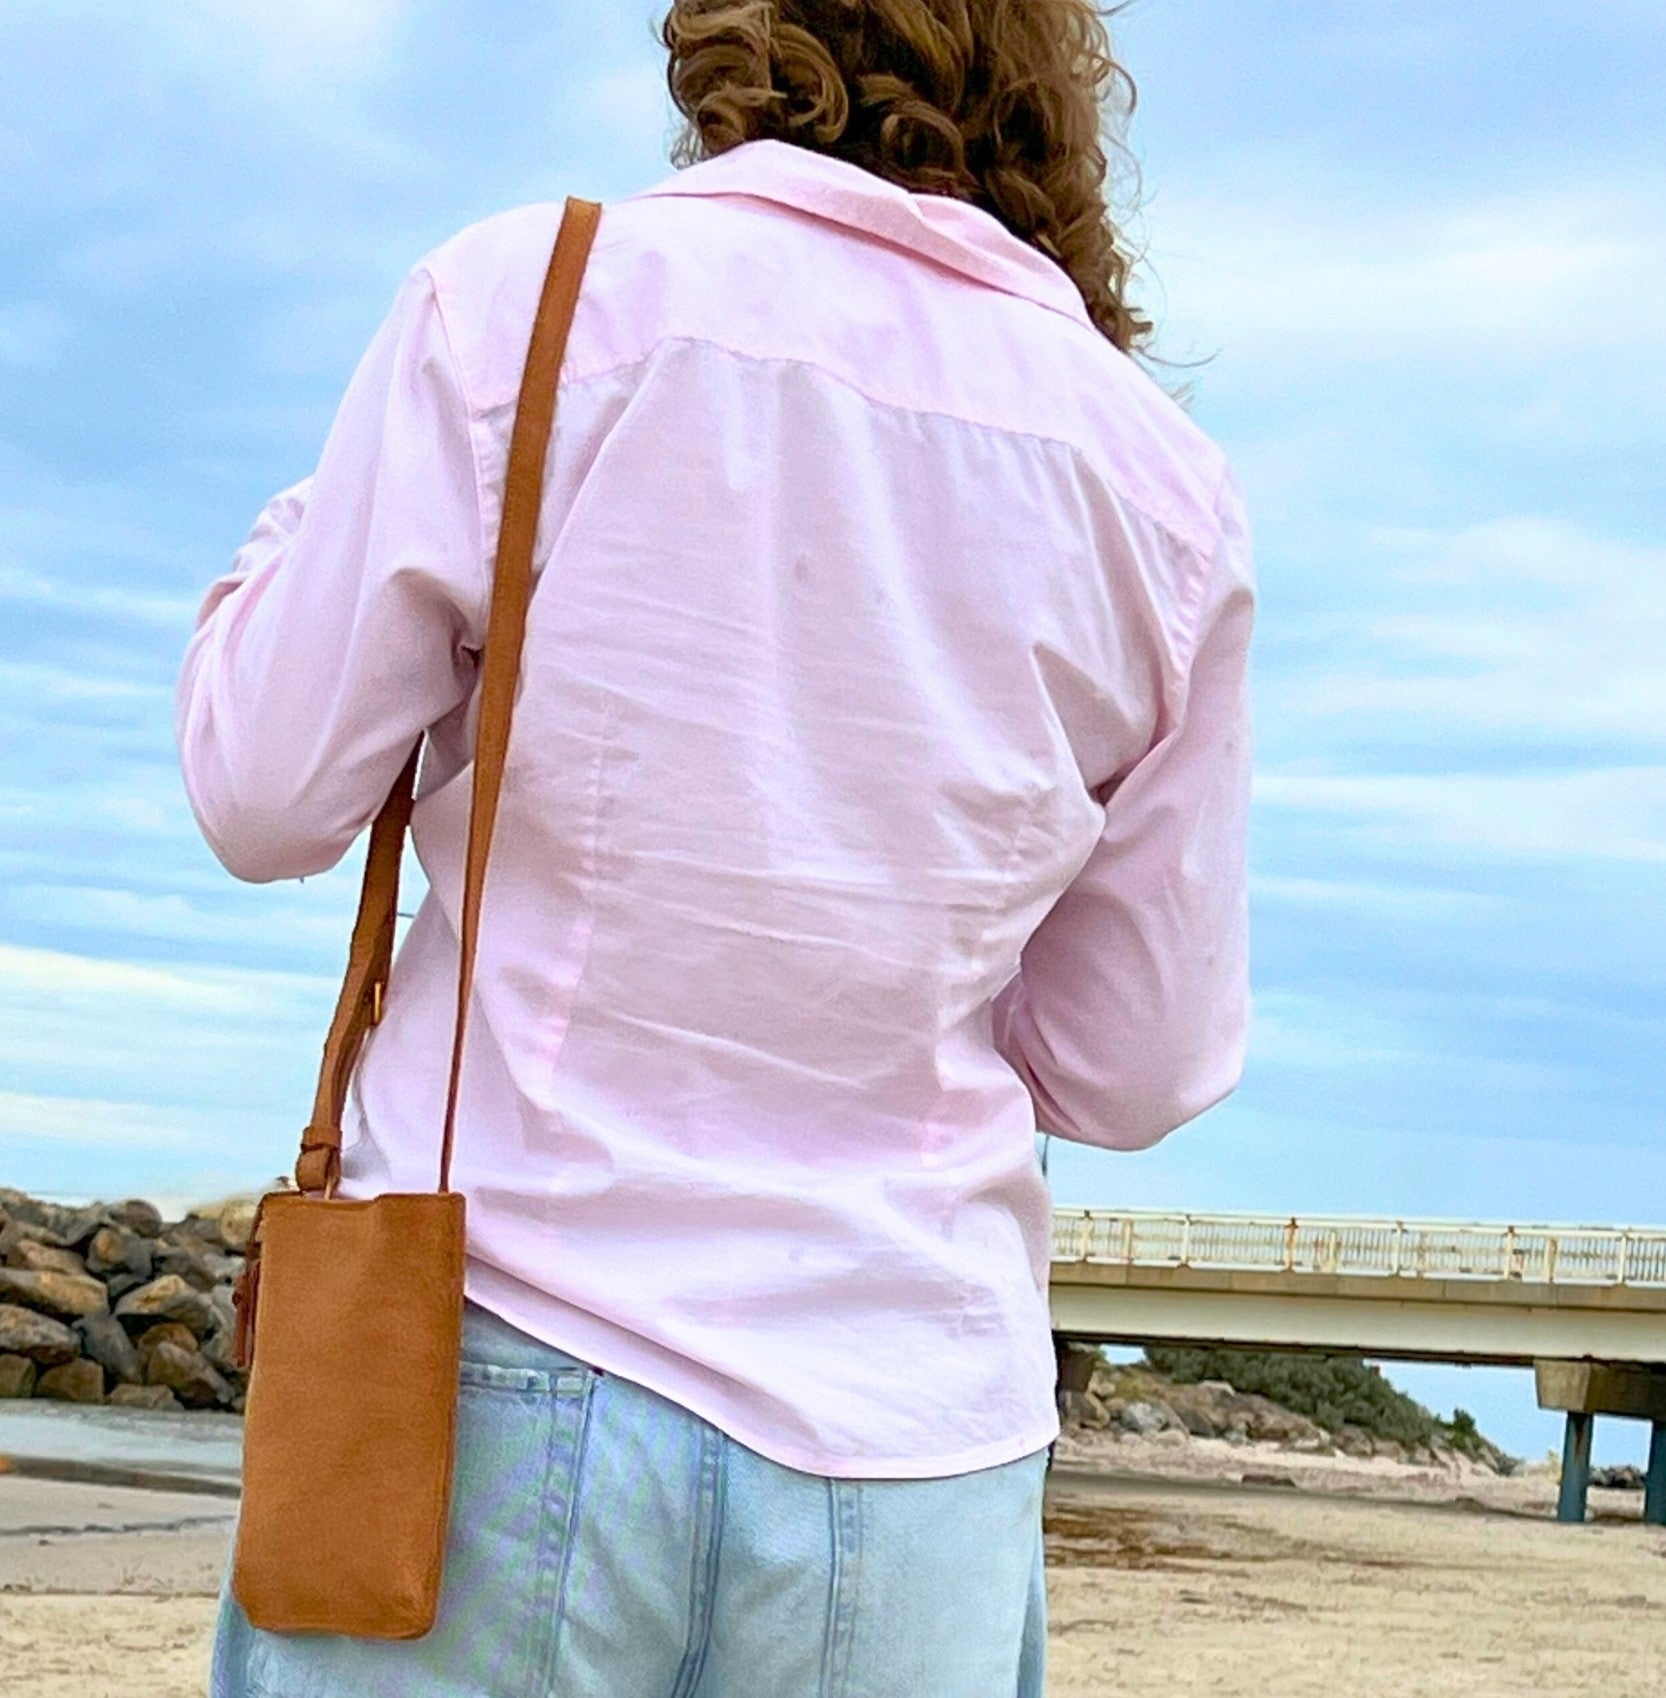 A person with curly hair, seen from the back, wears a pink shirt and light blue jeans, carrying a Georgie Paws Dog Walk Bag - Raw with brass hardware. They are on a beach with a cloudy sky.